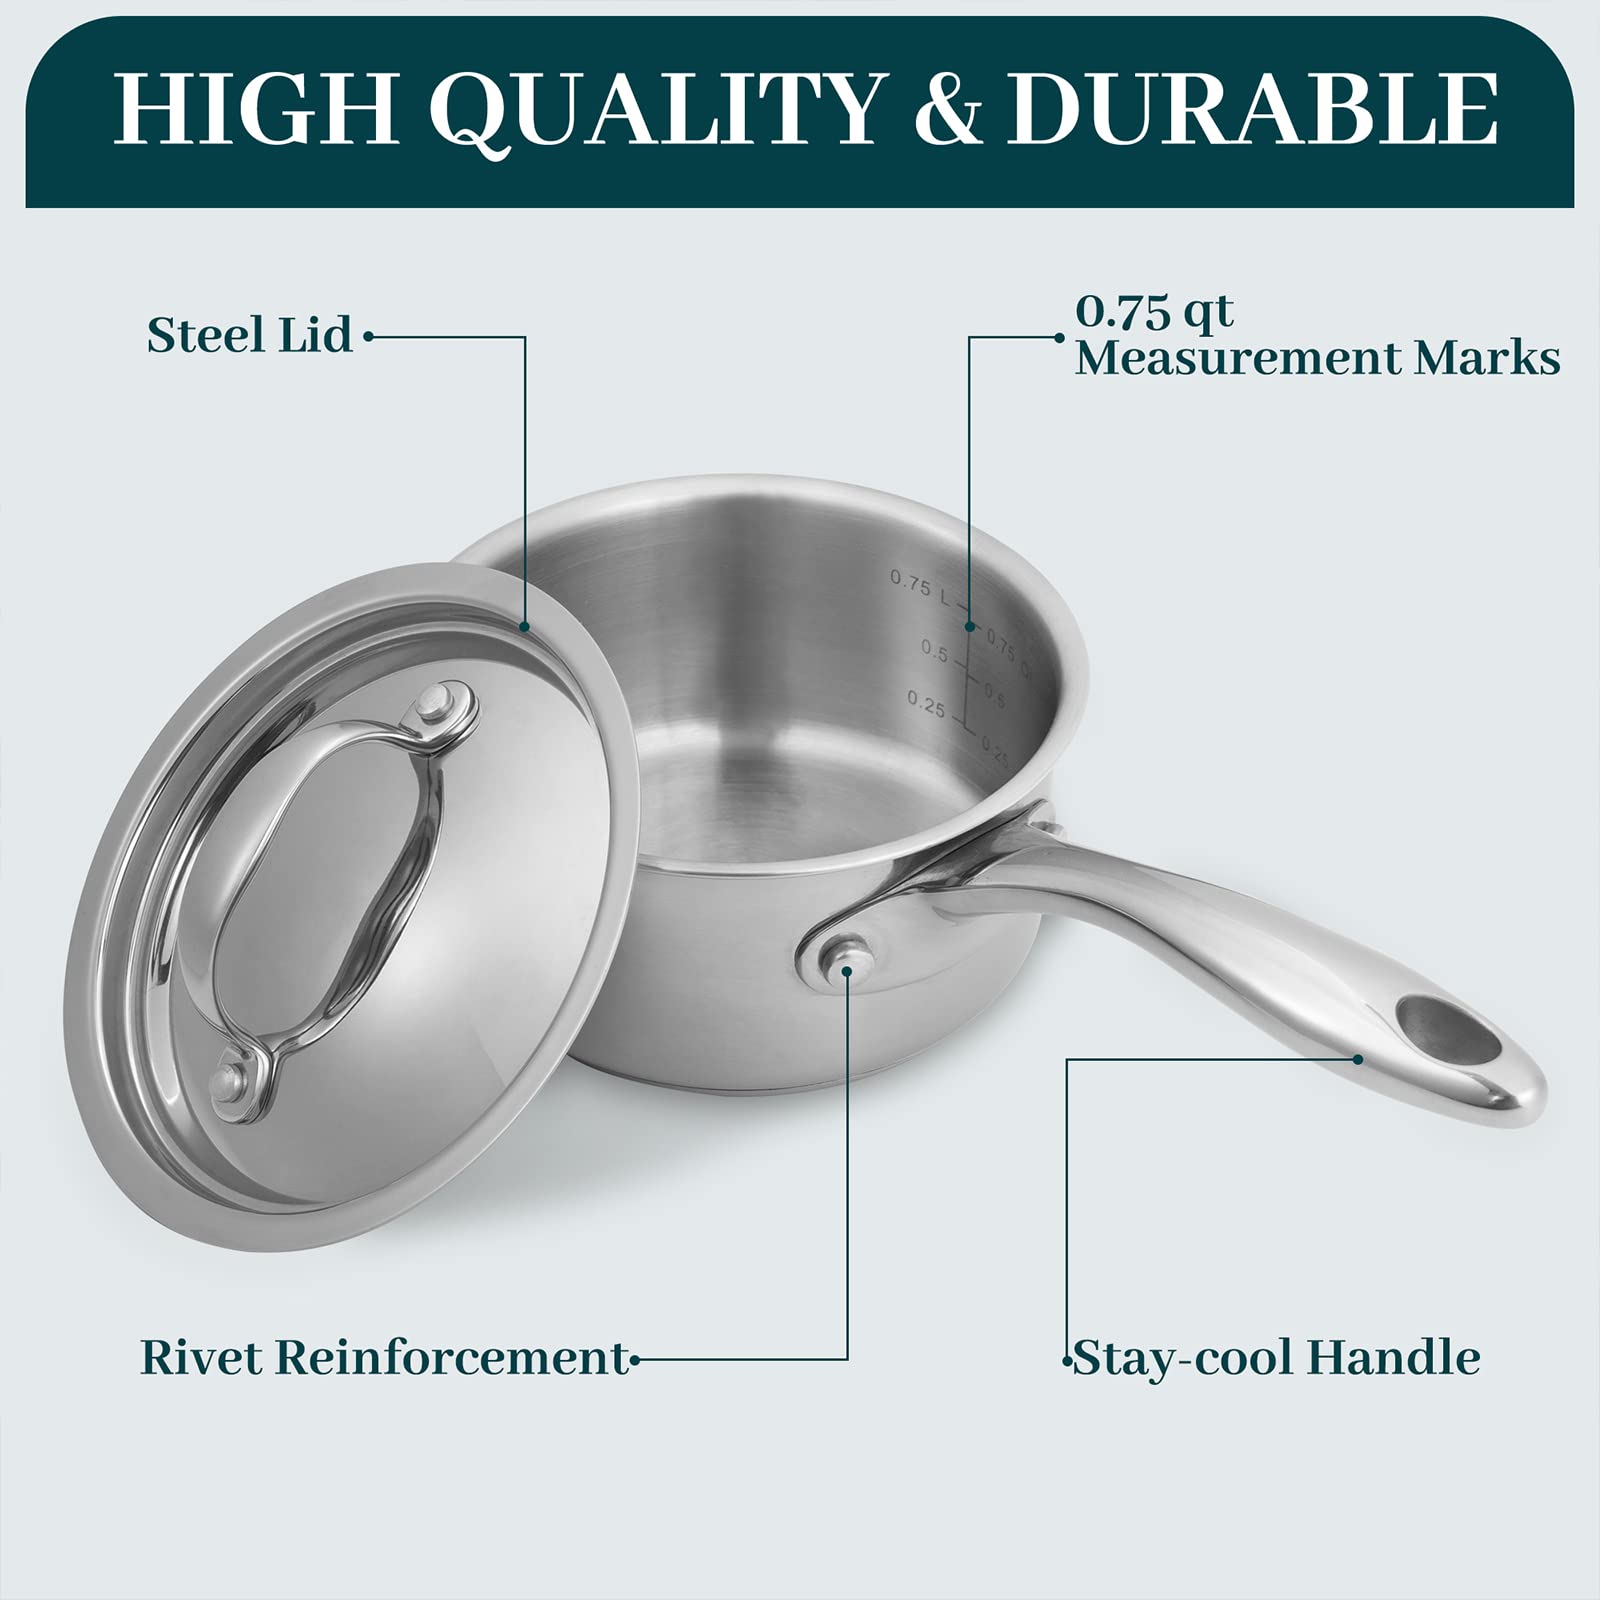 DELUXE Sauce Pan with Lid, 1 Quart Stainless Steel Saucepan with Stay-Cool Handle, Multipurpose Cooking Pot for Sauces Pasta, Suitable Induction/Electric Gas Cooktops, Dishwasher Oven Safe